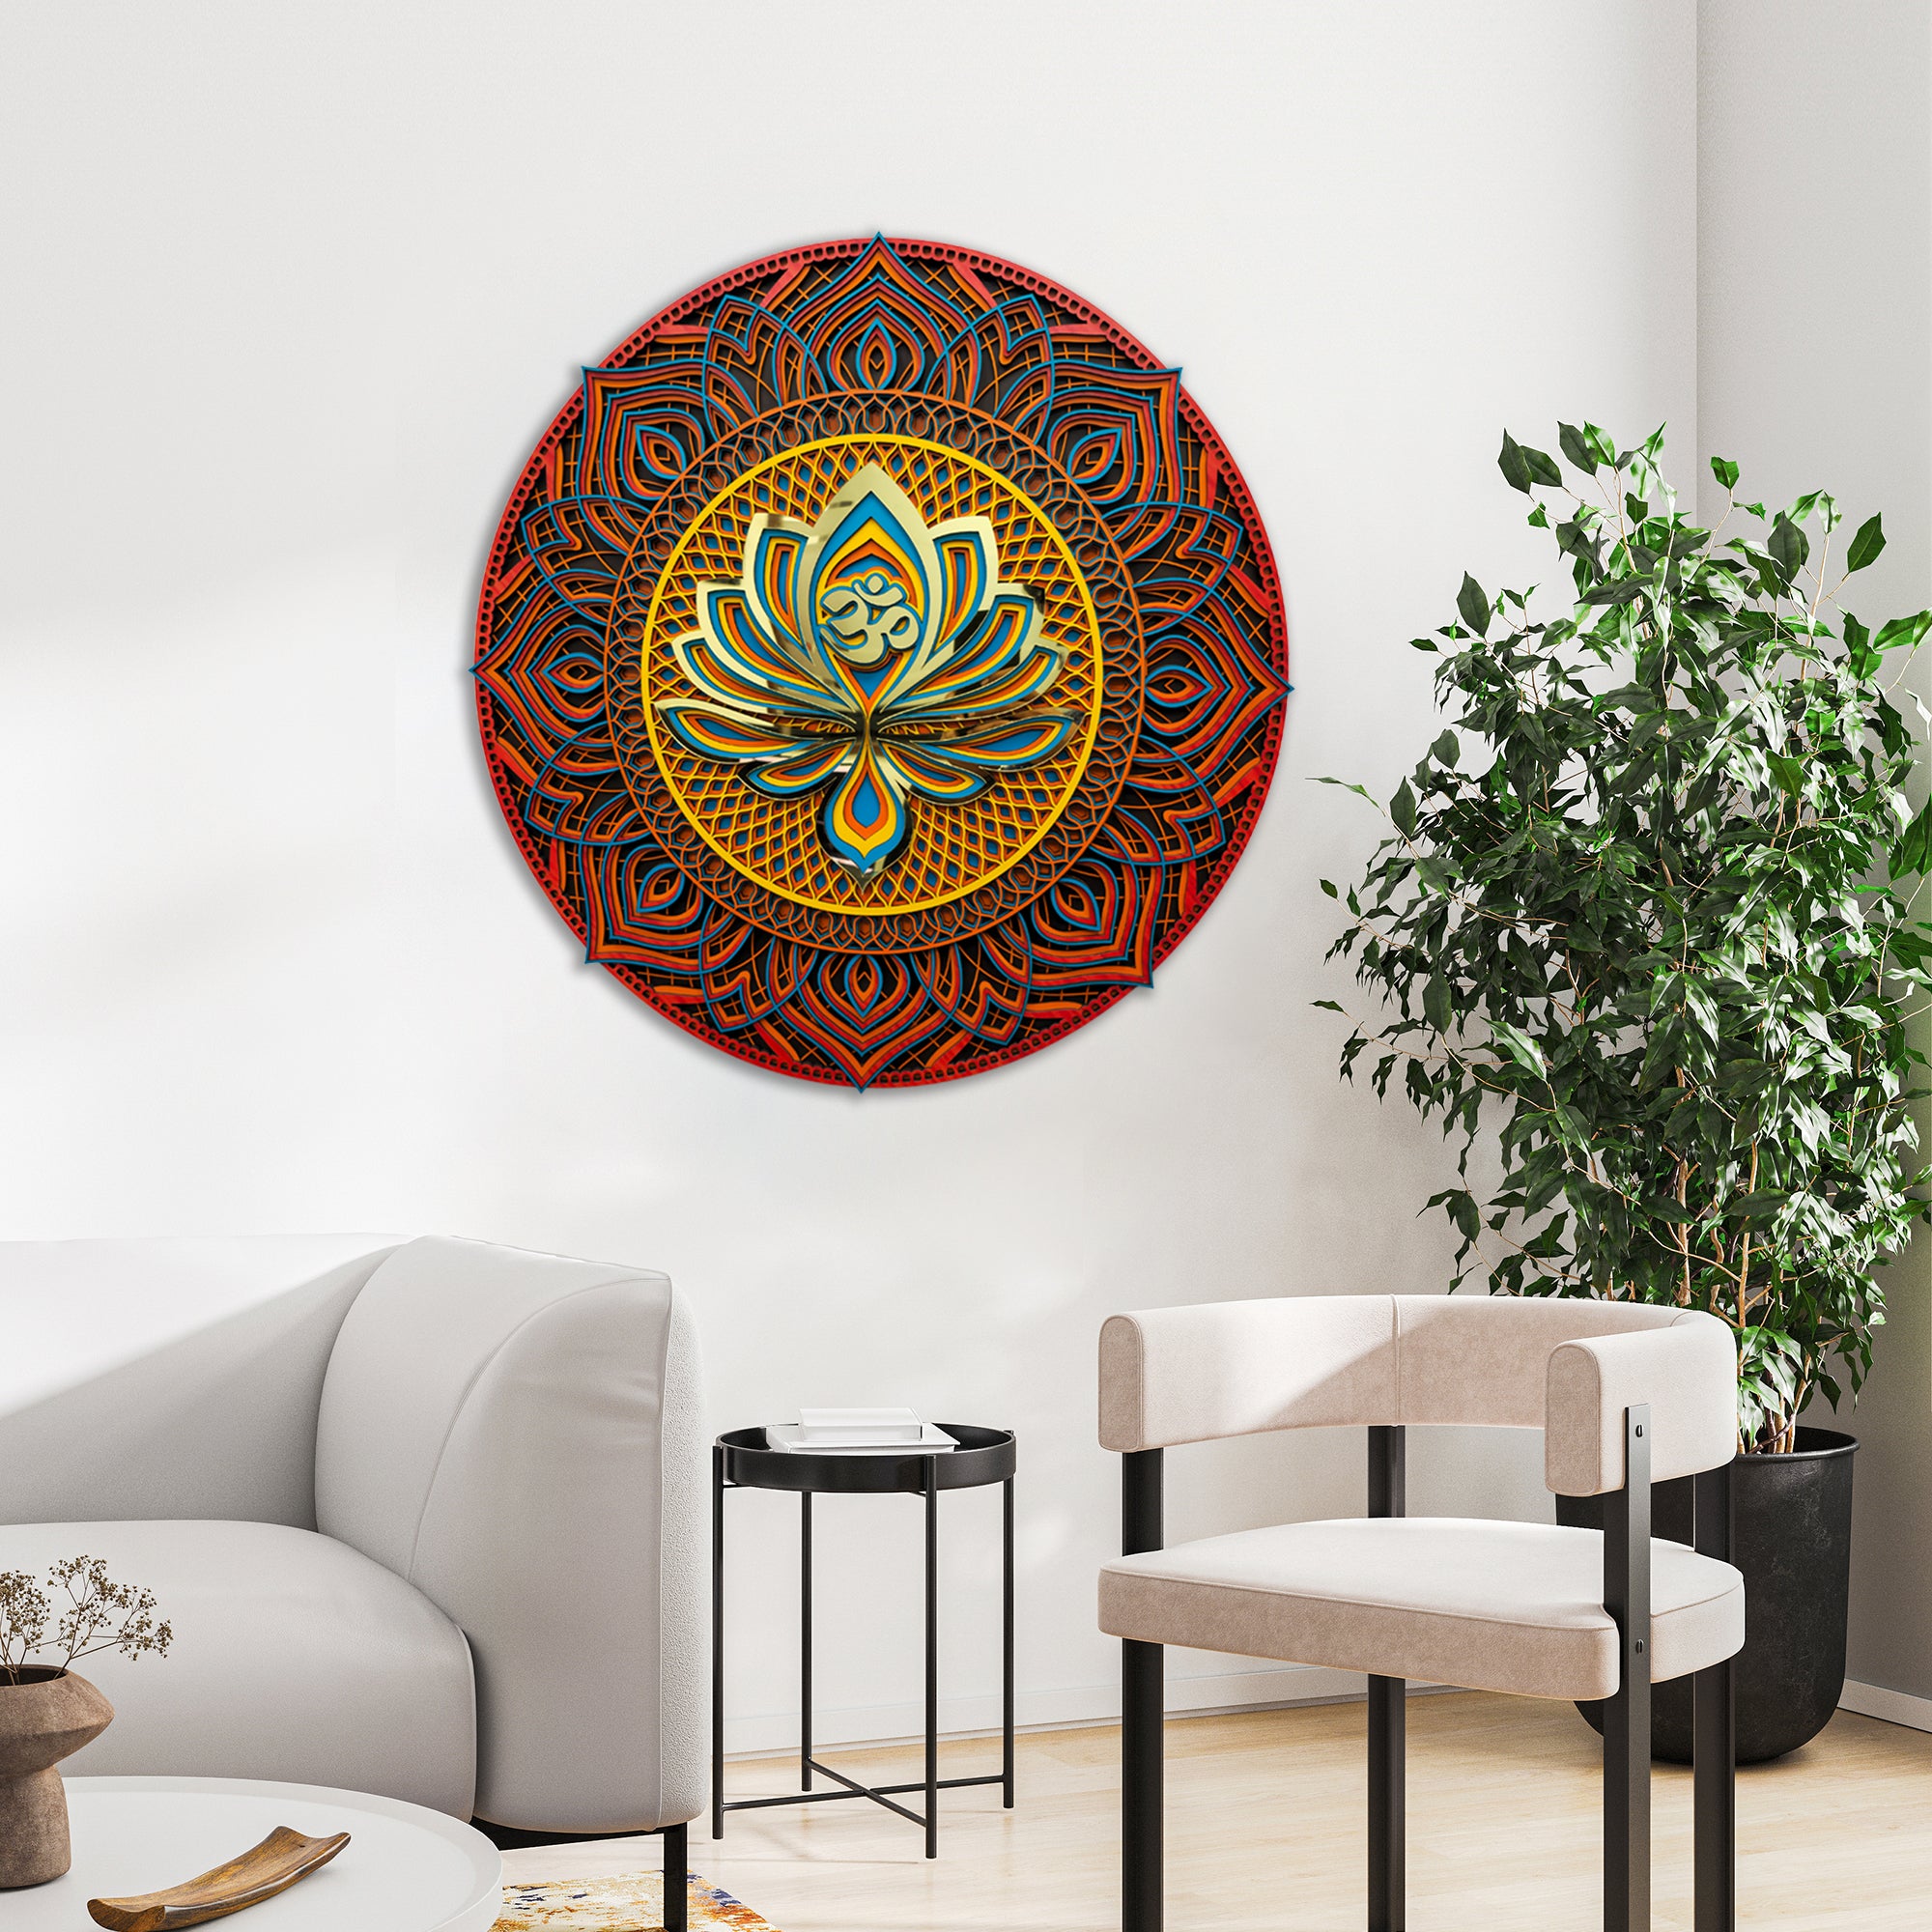 Decorate living room with Mandala Wall Decor